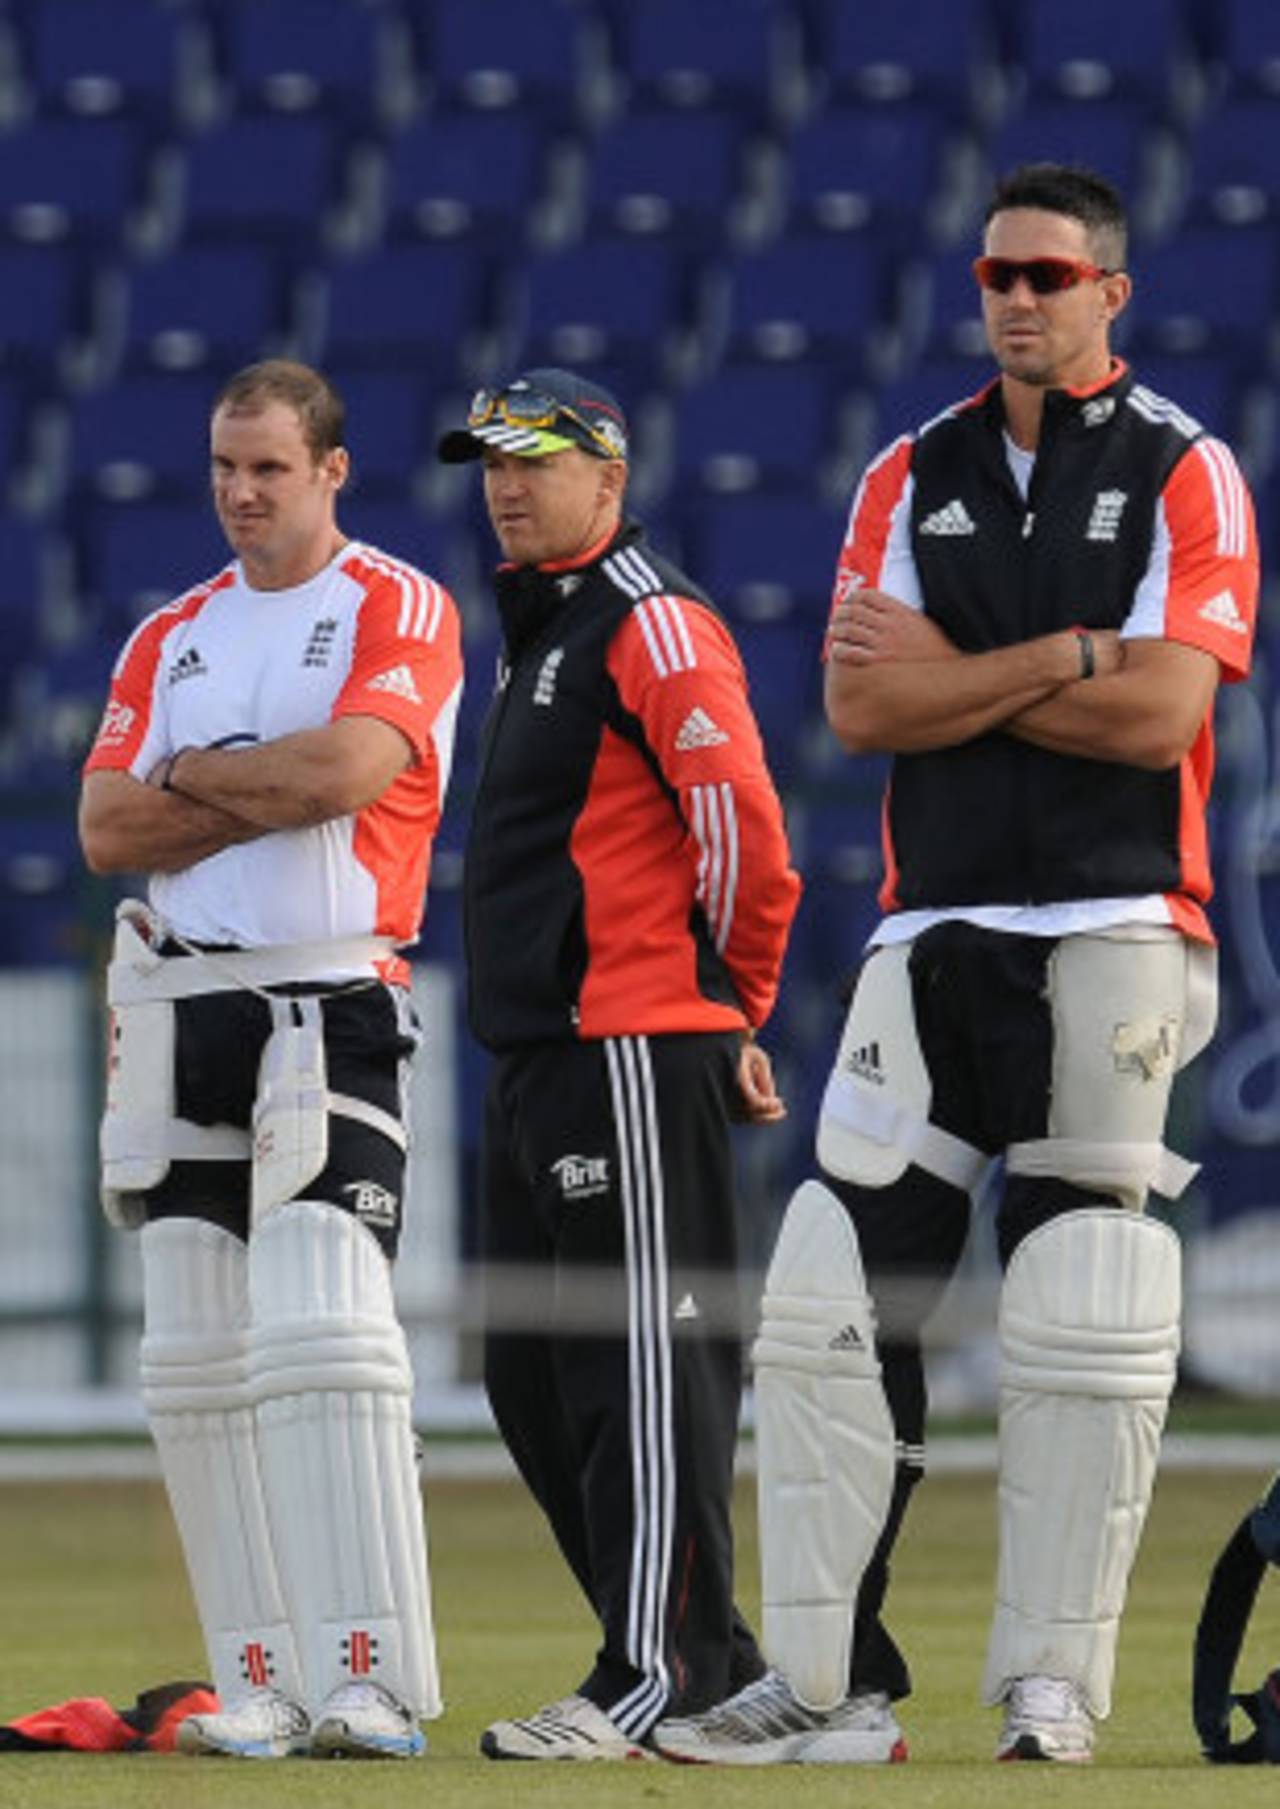 Andrew Strauss, Andy Flower and Kevin Pietersen observe England's net session, Abu Dhabi, January, 24, 2012